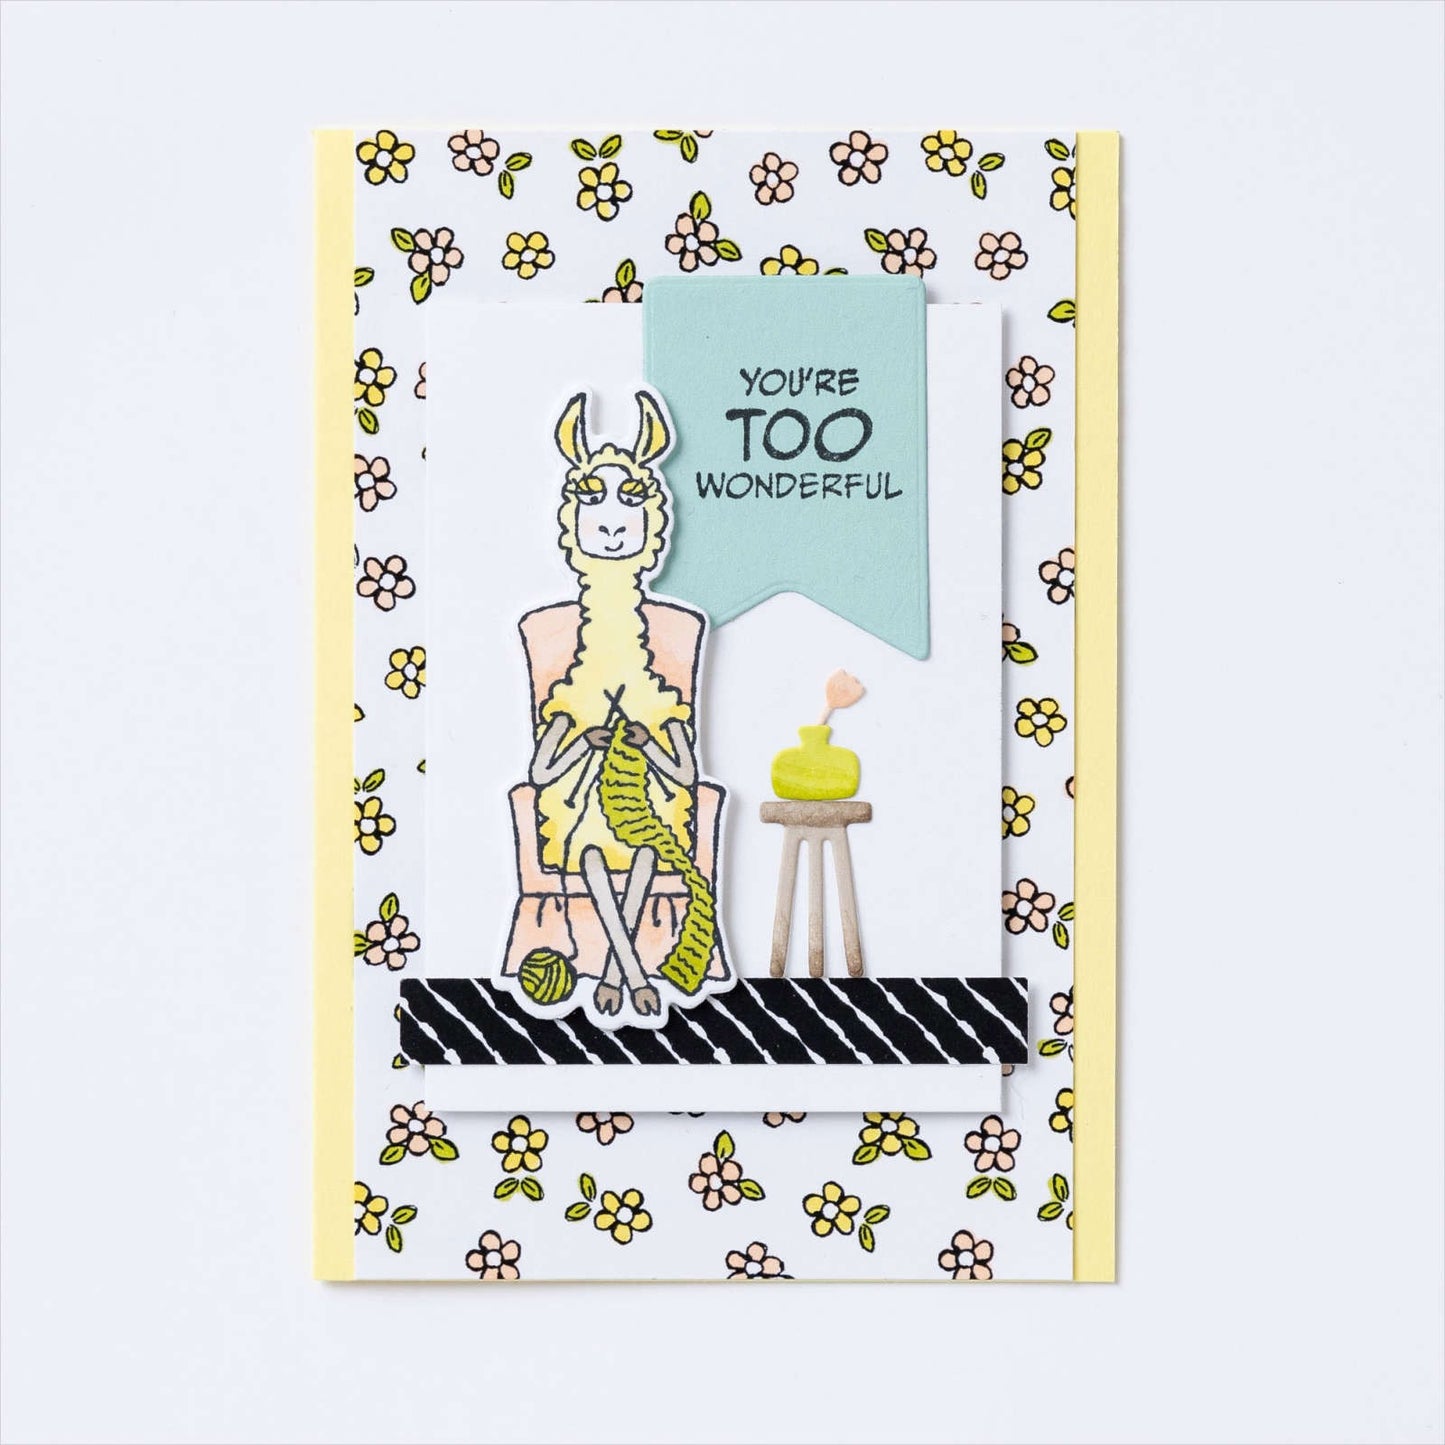 Stampin' Up! Zoo Crew DSP